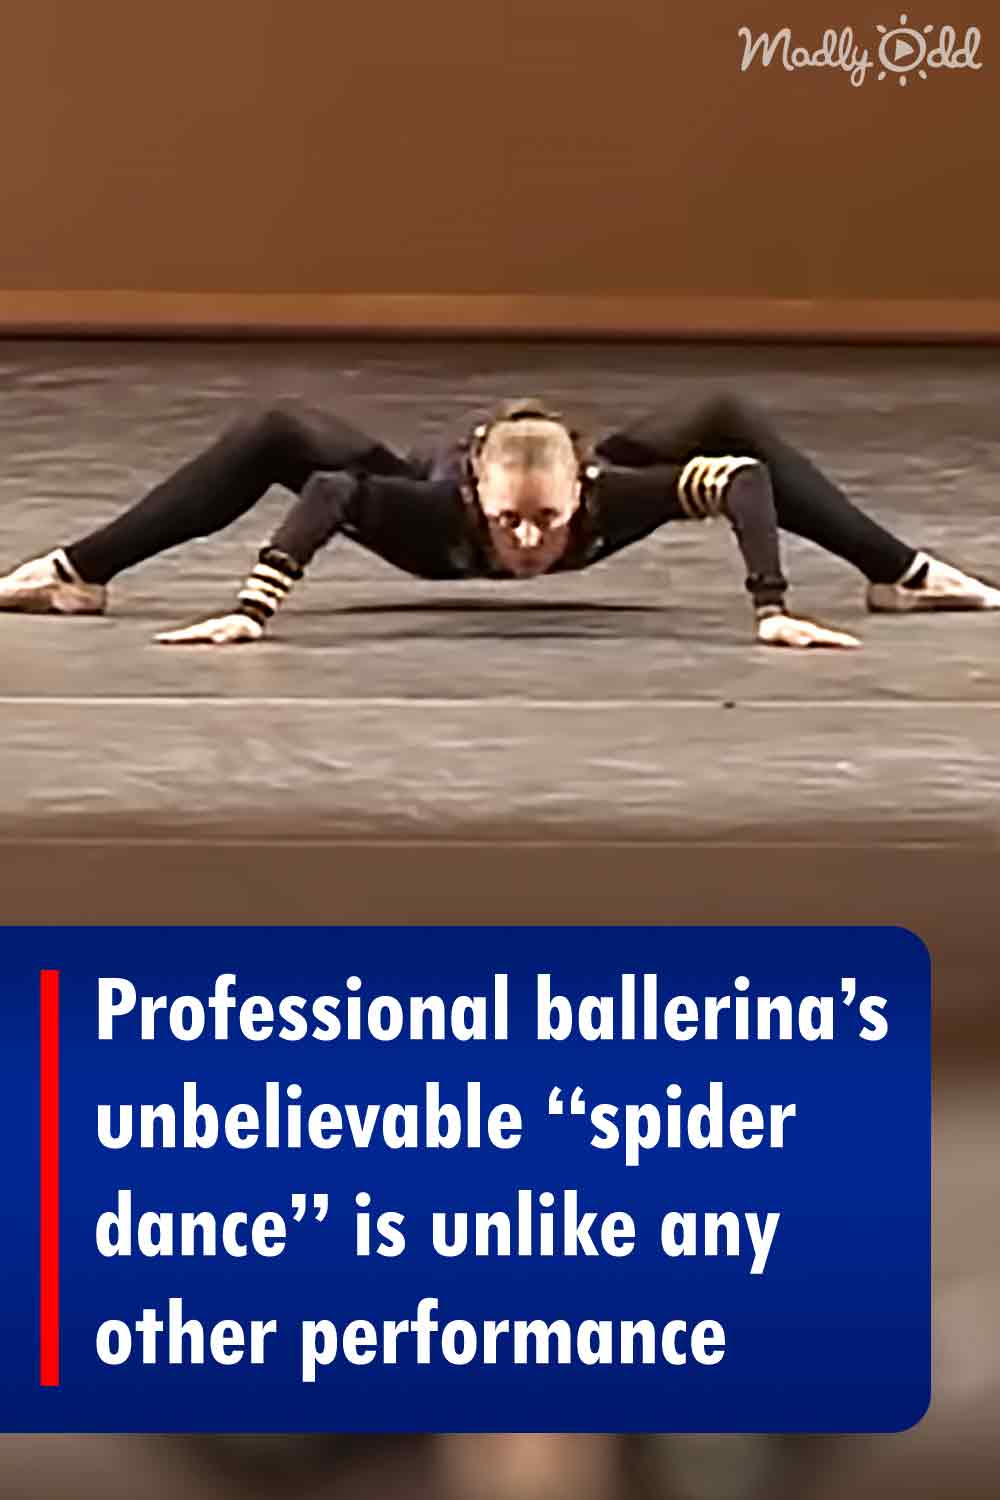 Professional ballerina’s unbelievable “spider dance” is unlike any other performance